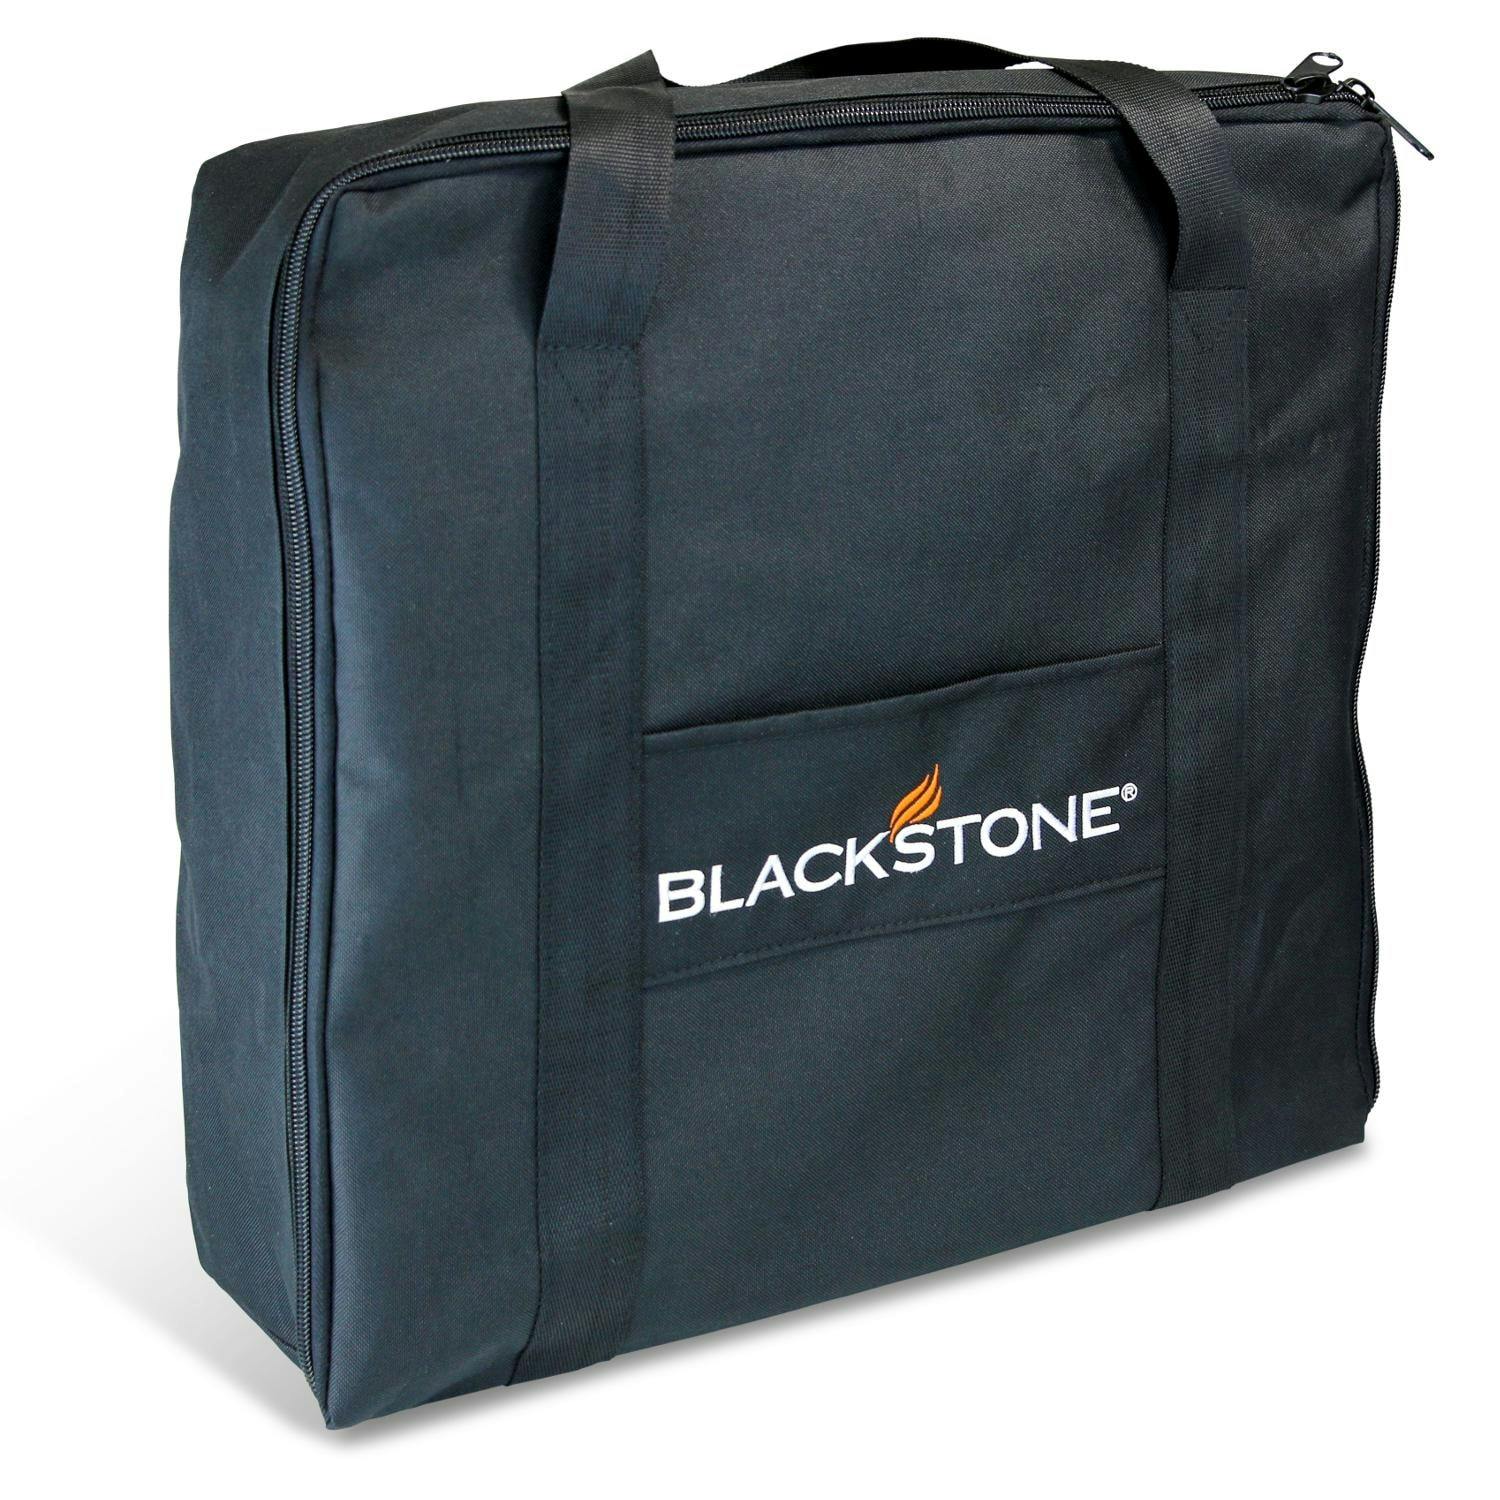 Blackstone Cover & Carry Bag Set for 17 in. Tabletop Griddles · 12 in.